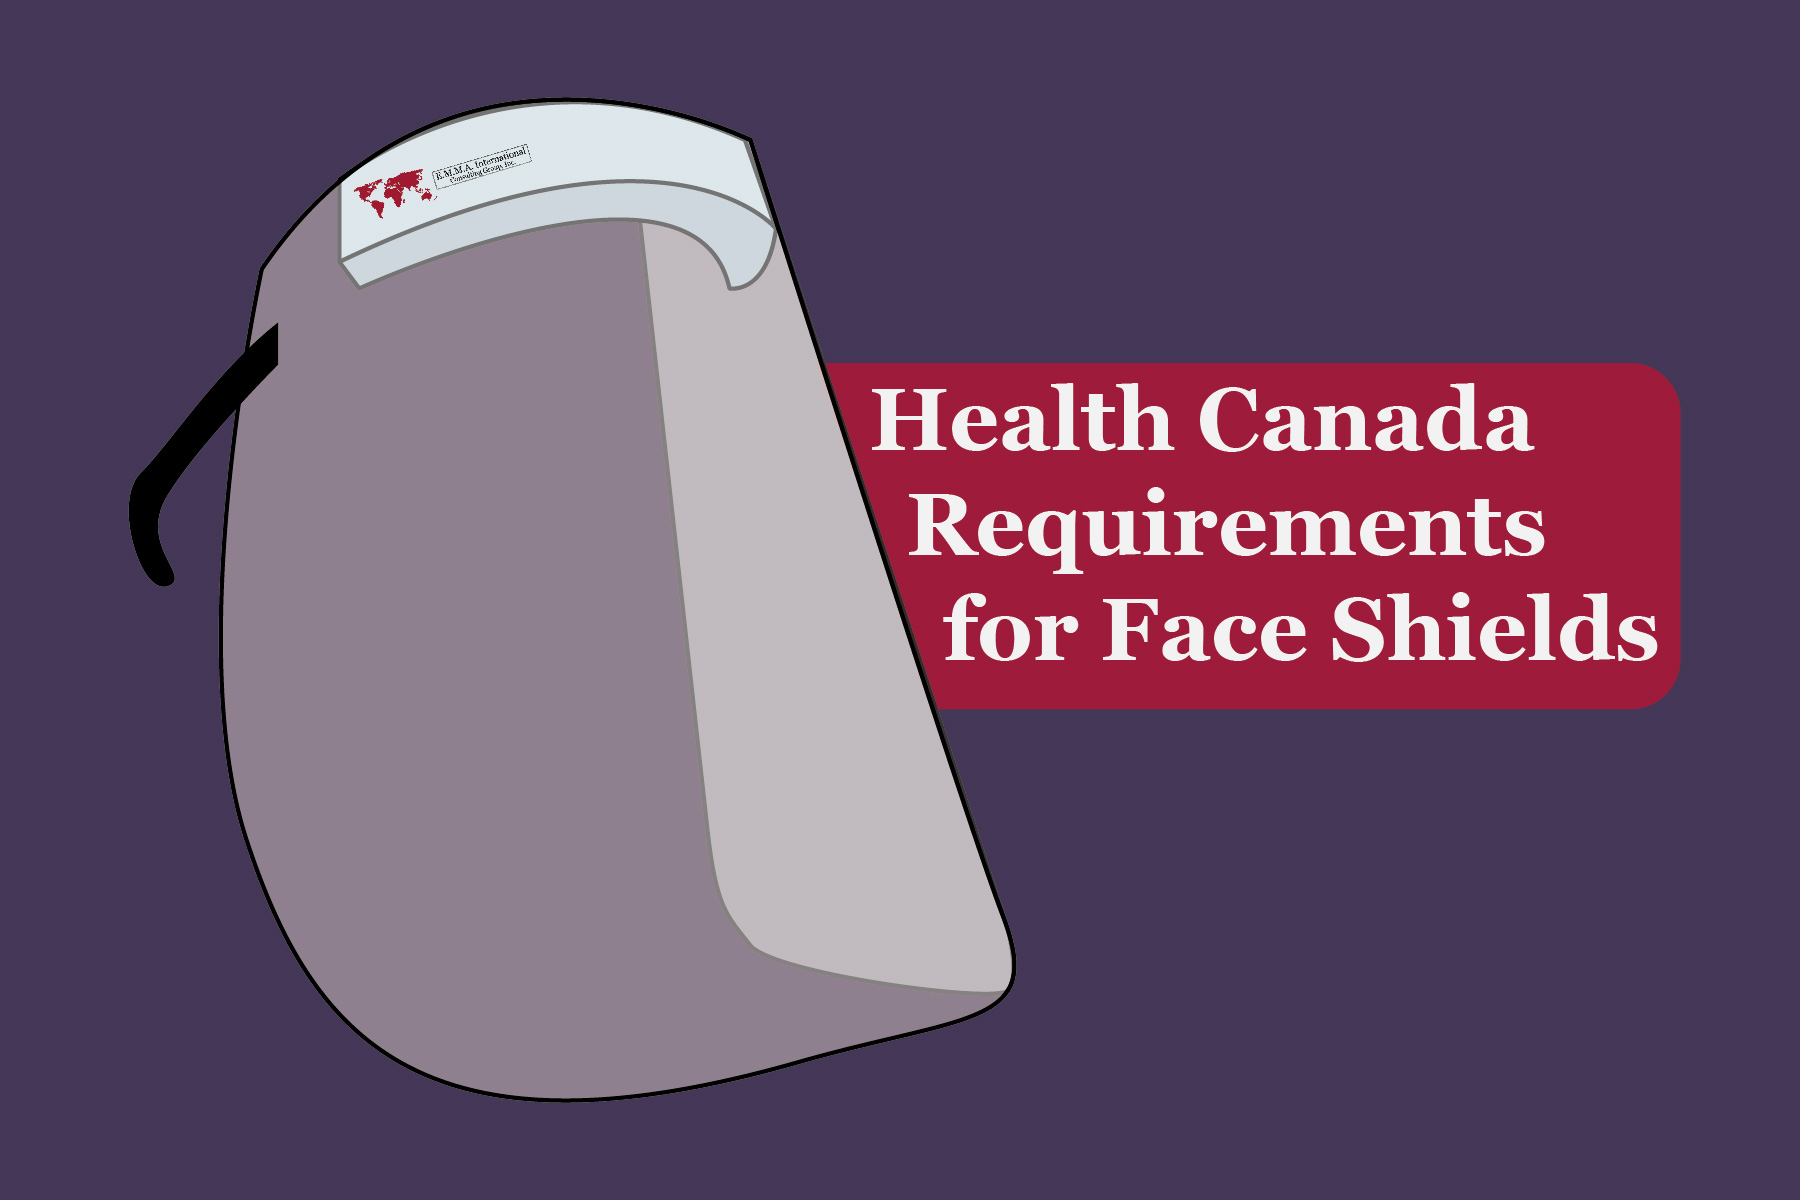 Health Canada Requirements for Face Shields